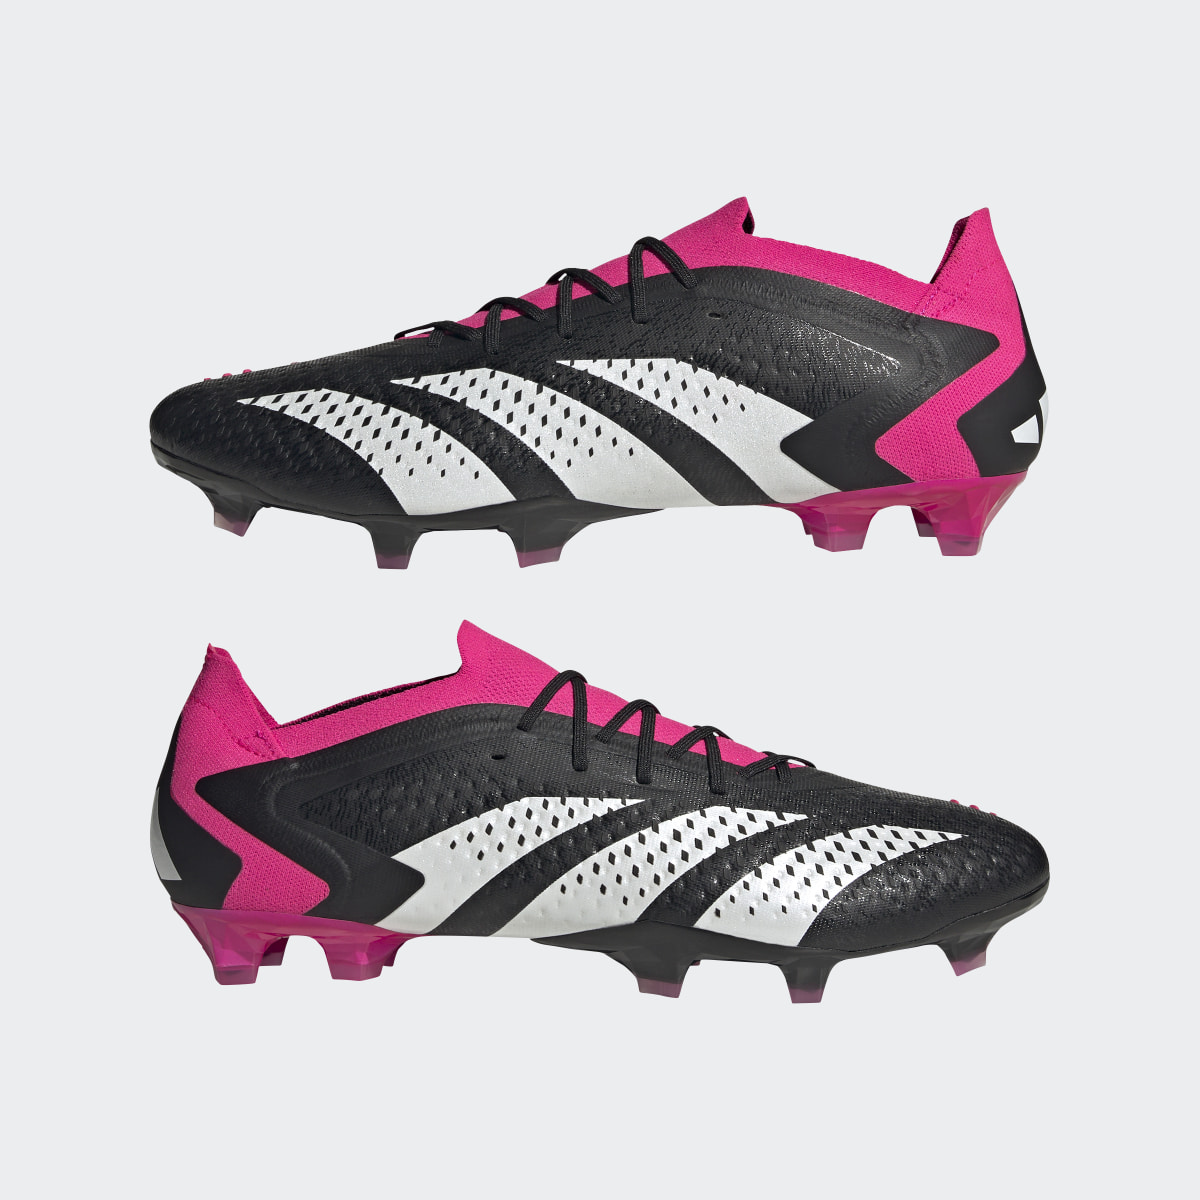 Adidas Predator Accuracy.1 Low Firm Ground Cleats. 12